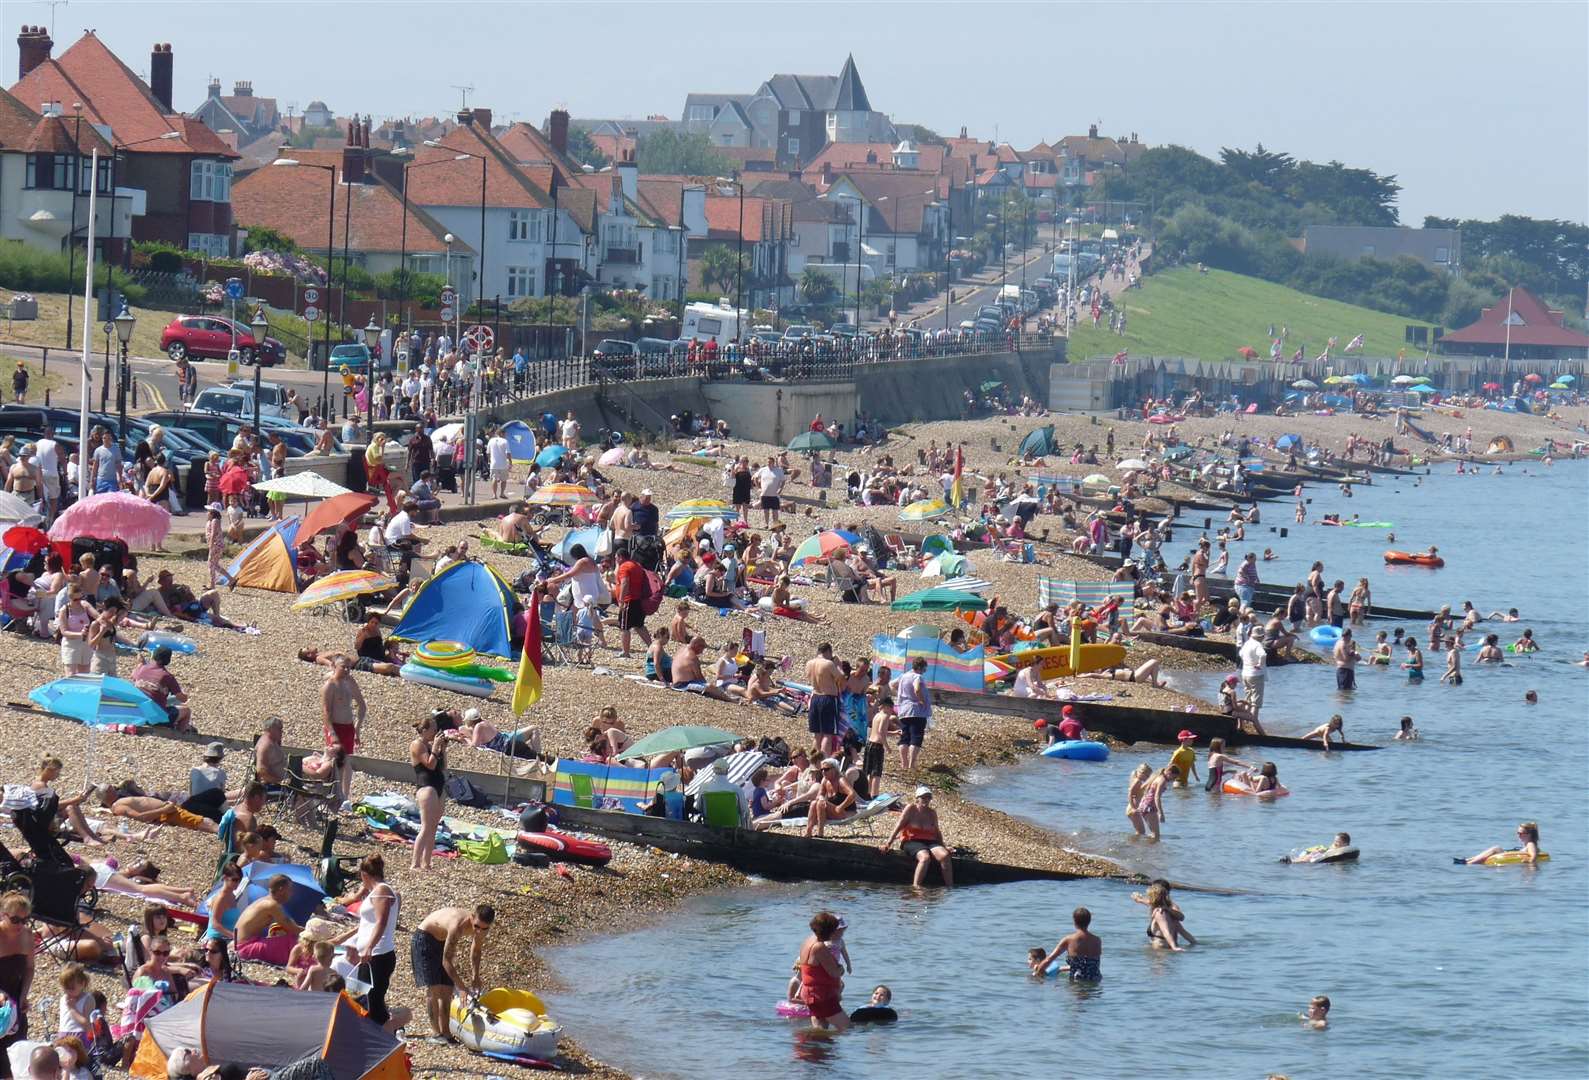 Herne Bay beach packed during a sizzlingly hot summer – remember those? Pic: Scott Turner